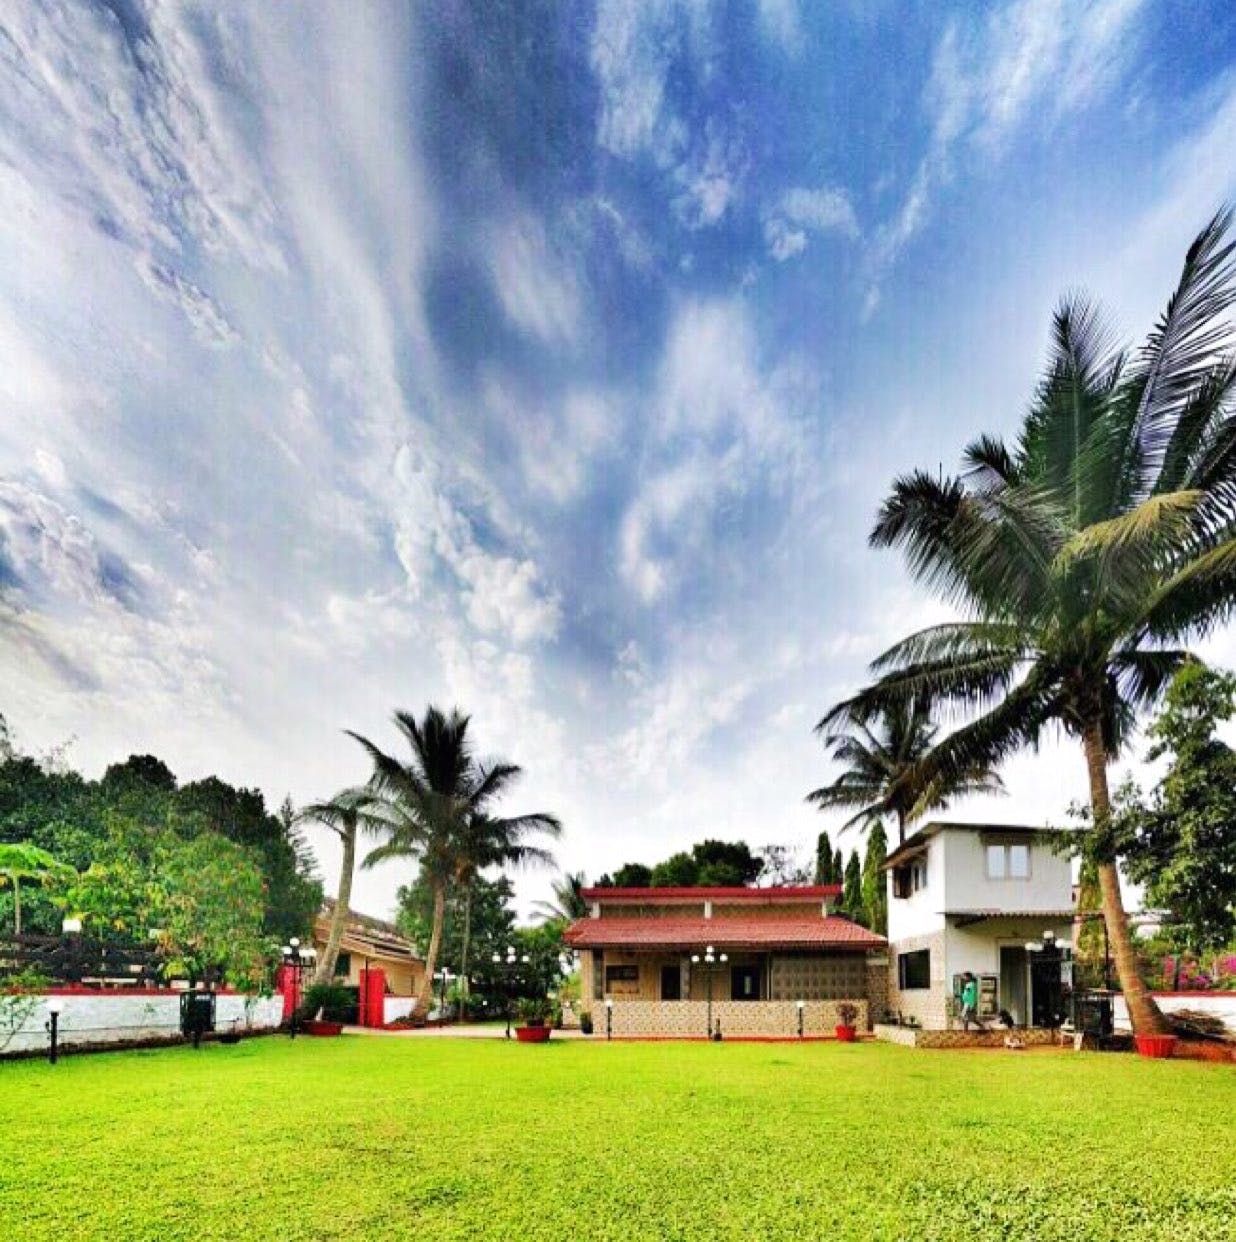 Sky,Cloud,Tree,Palm tree,Property,Grass,Daytime,House,Natural environment,Architecture